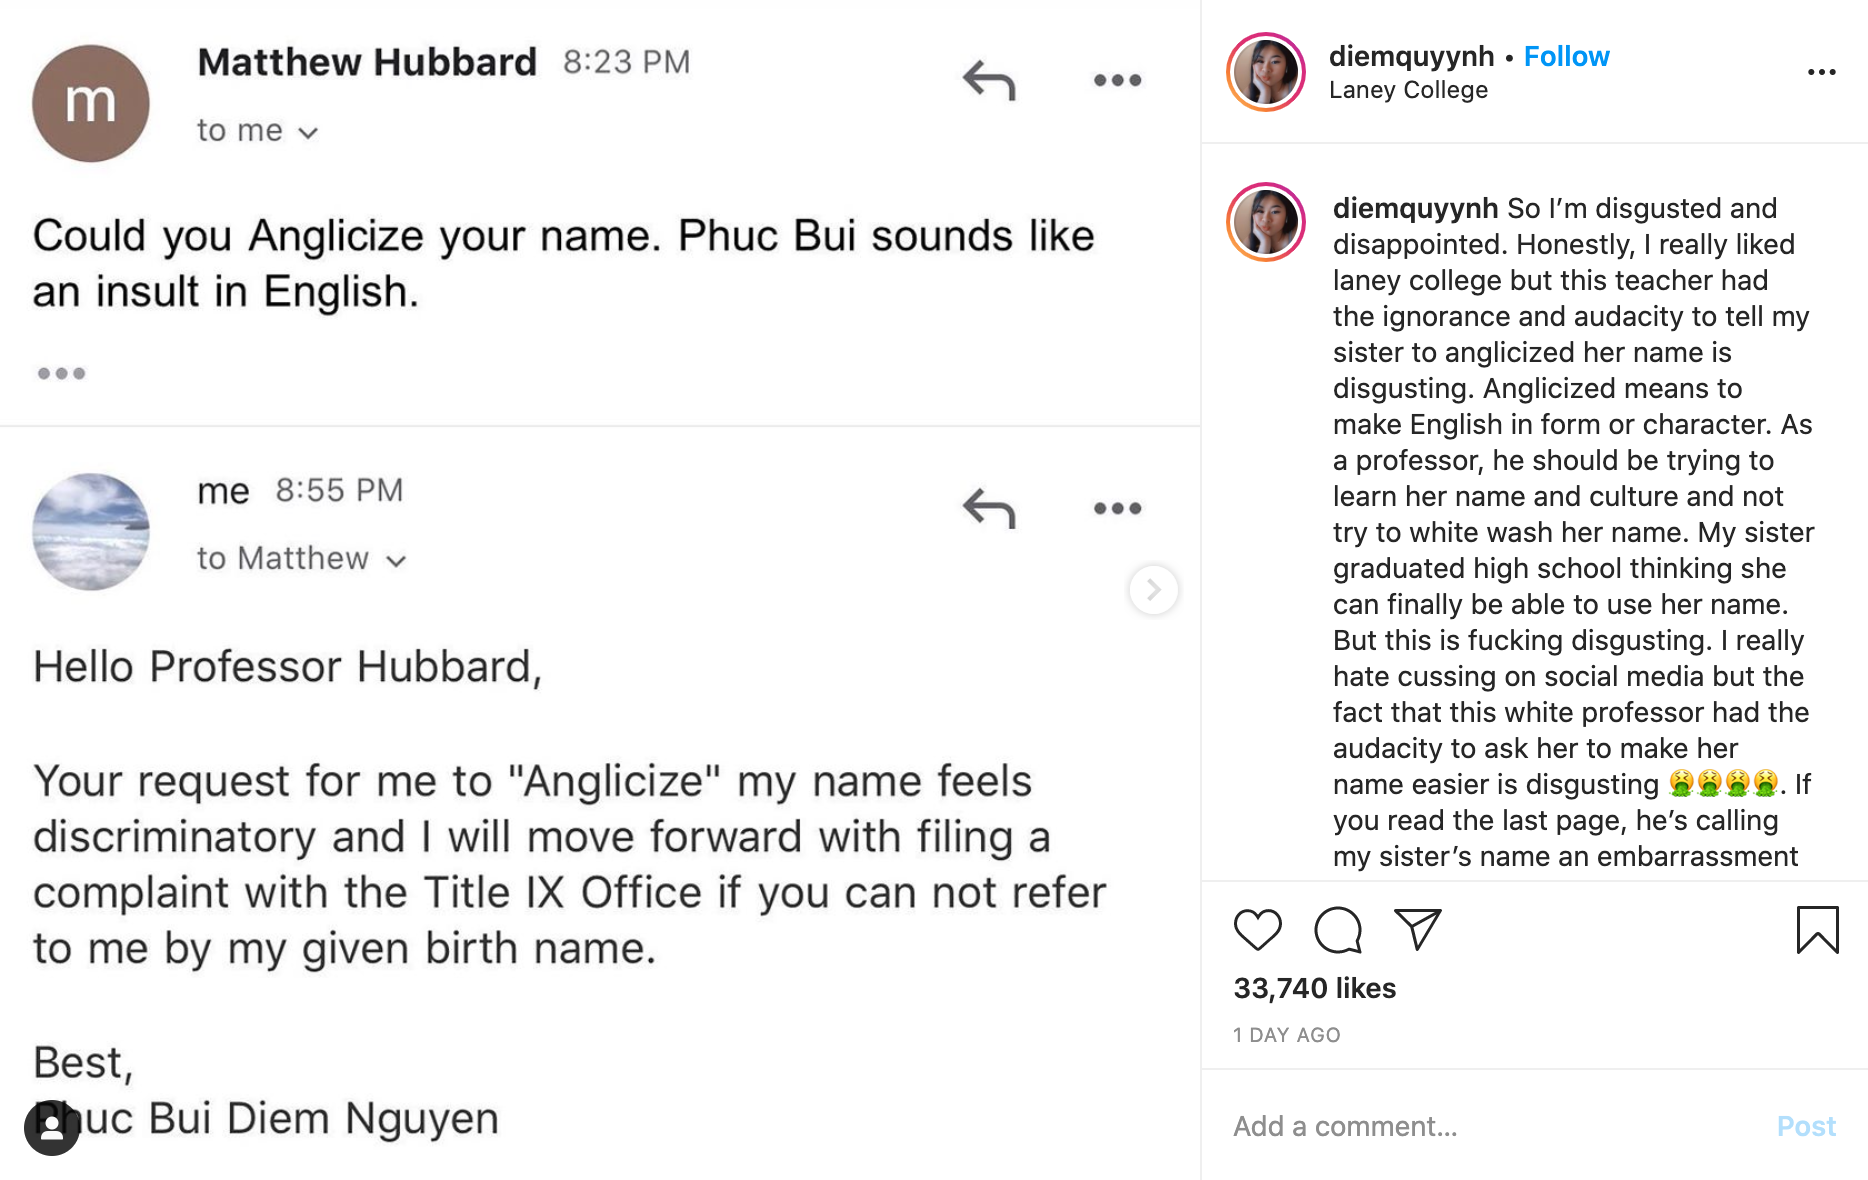 US professor who told student to ‘anglicize’ Vietnamese name placed on leave